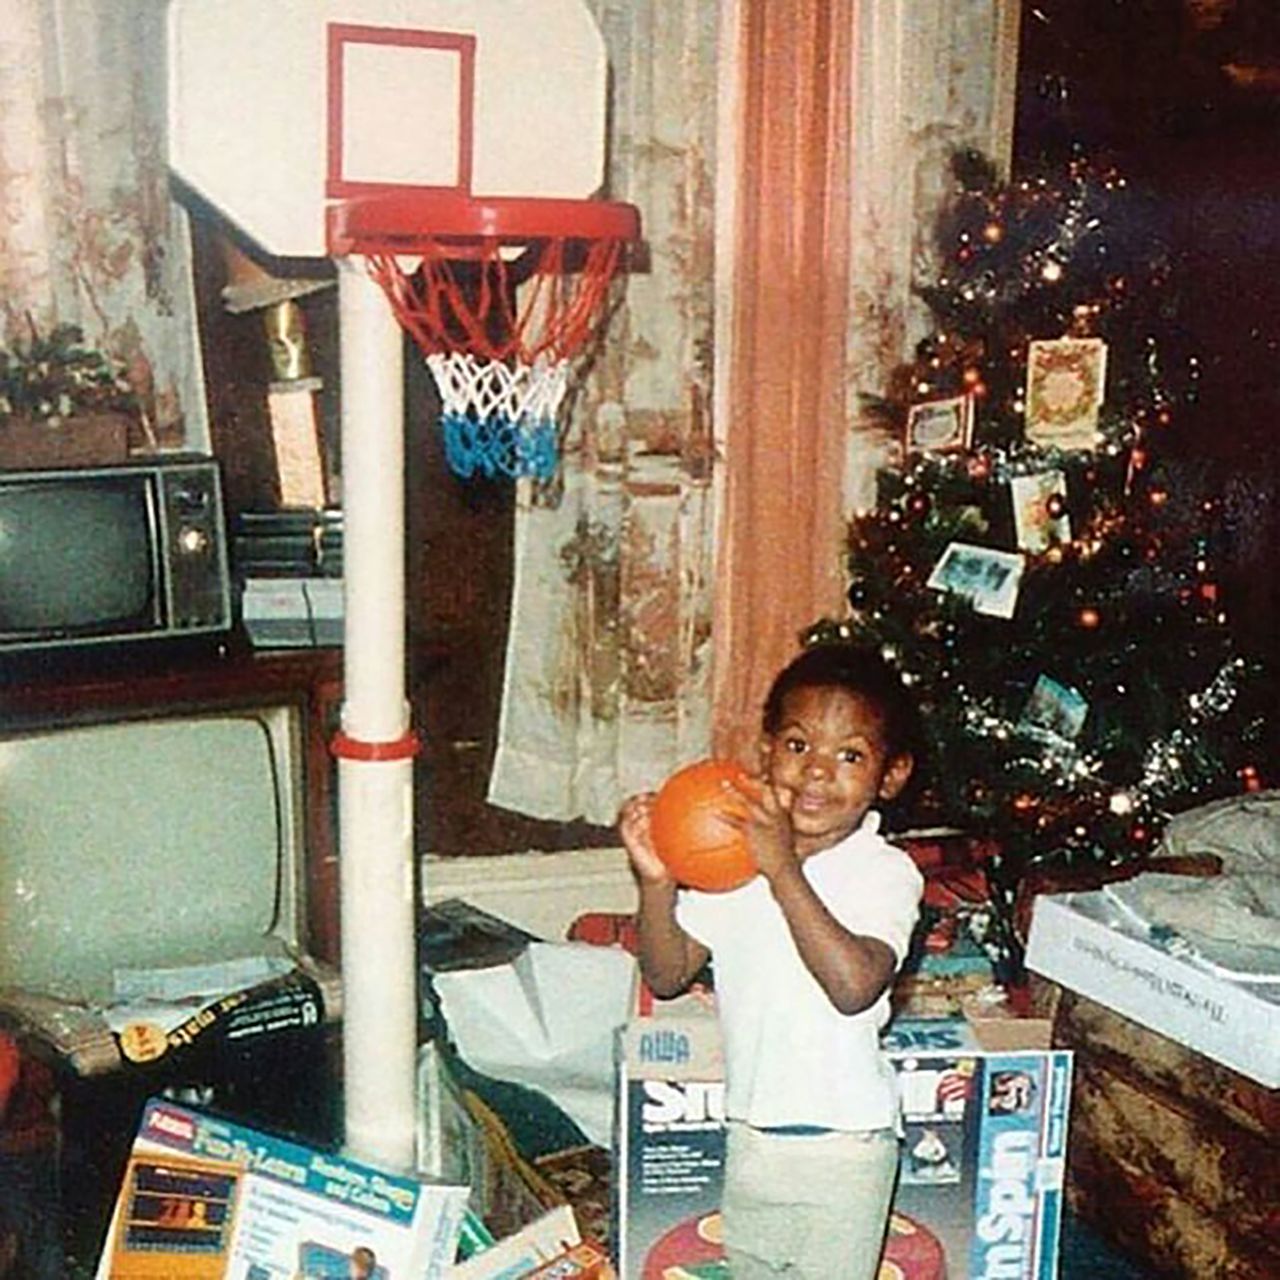 A young James plays on a toy basketball hoop at Christmas time. "I guess I was kinda born to do this," <a href="https://www.instagram.com/p/BOdrACuhUxO/" target="_blank" target="_blank">he said on Instagram</a>.